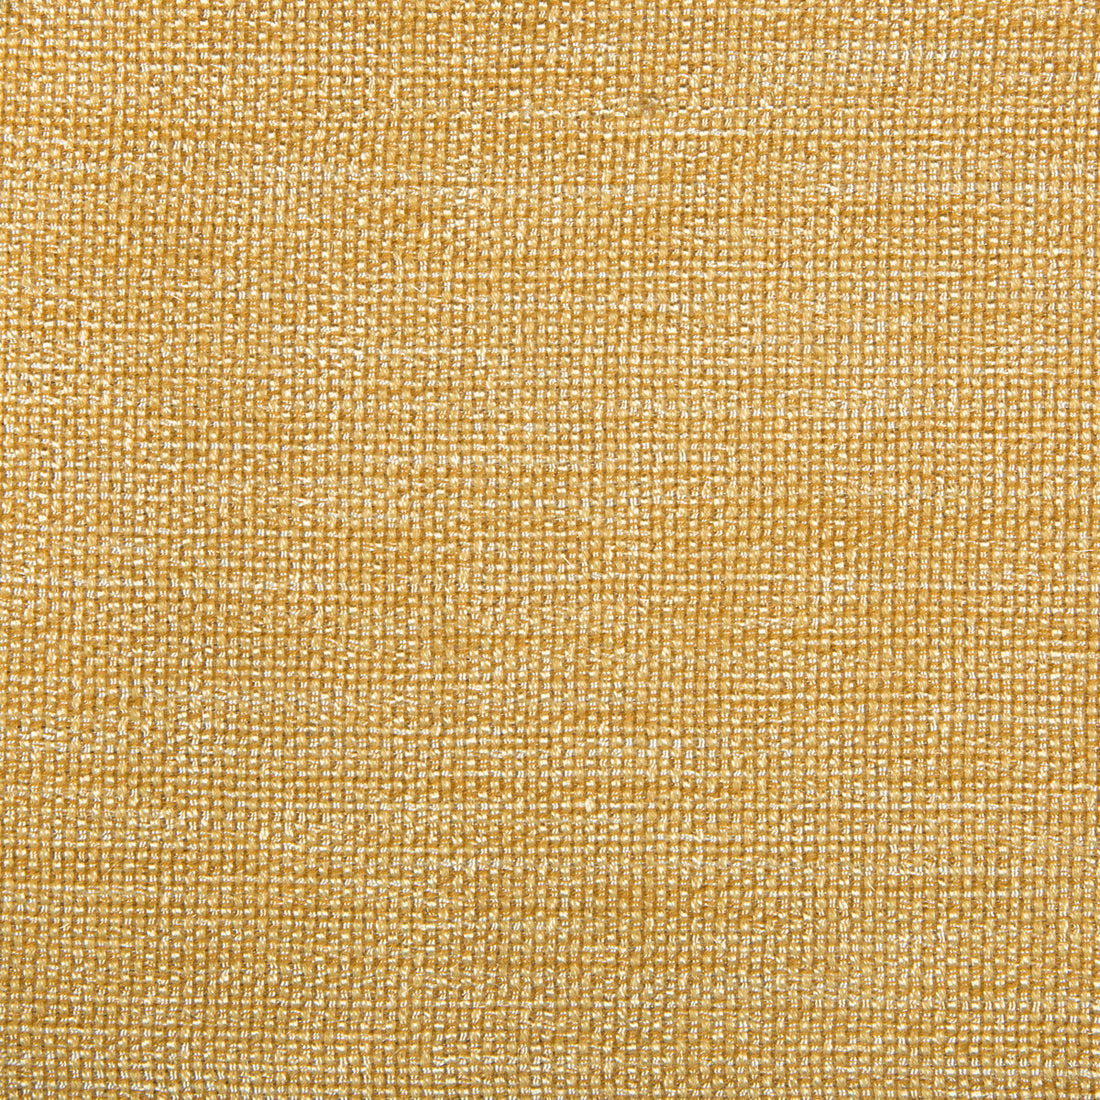 Kravet Contract fabric in 4458-4 color - pattern 4458.4.0 - by Kravet Contract